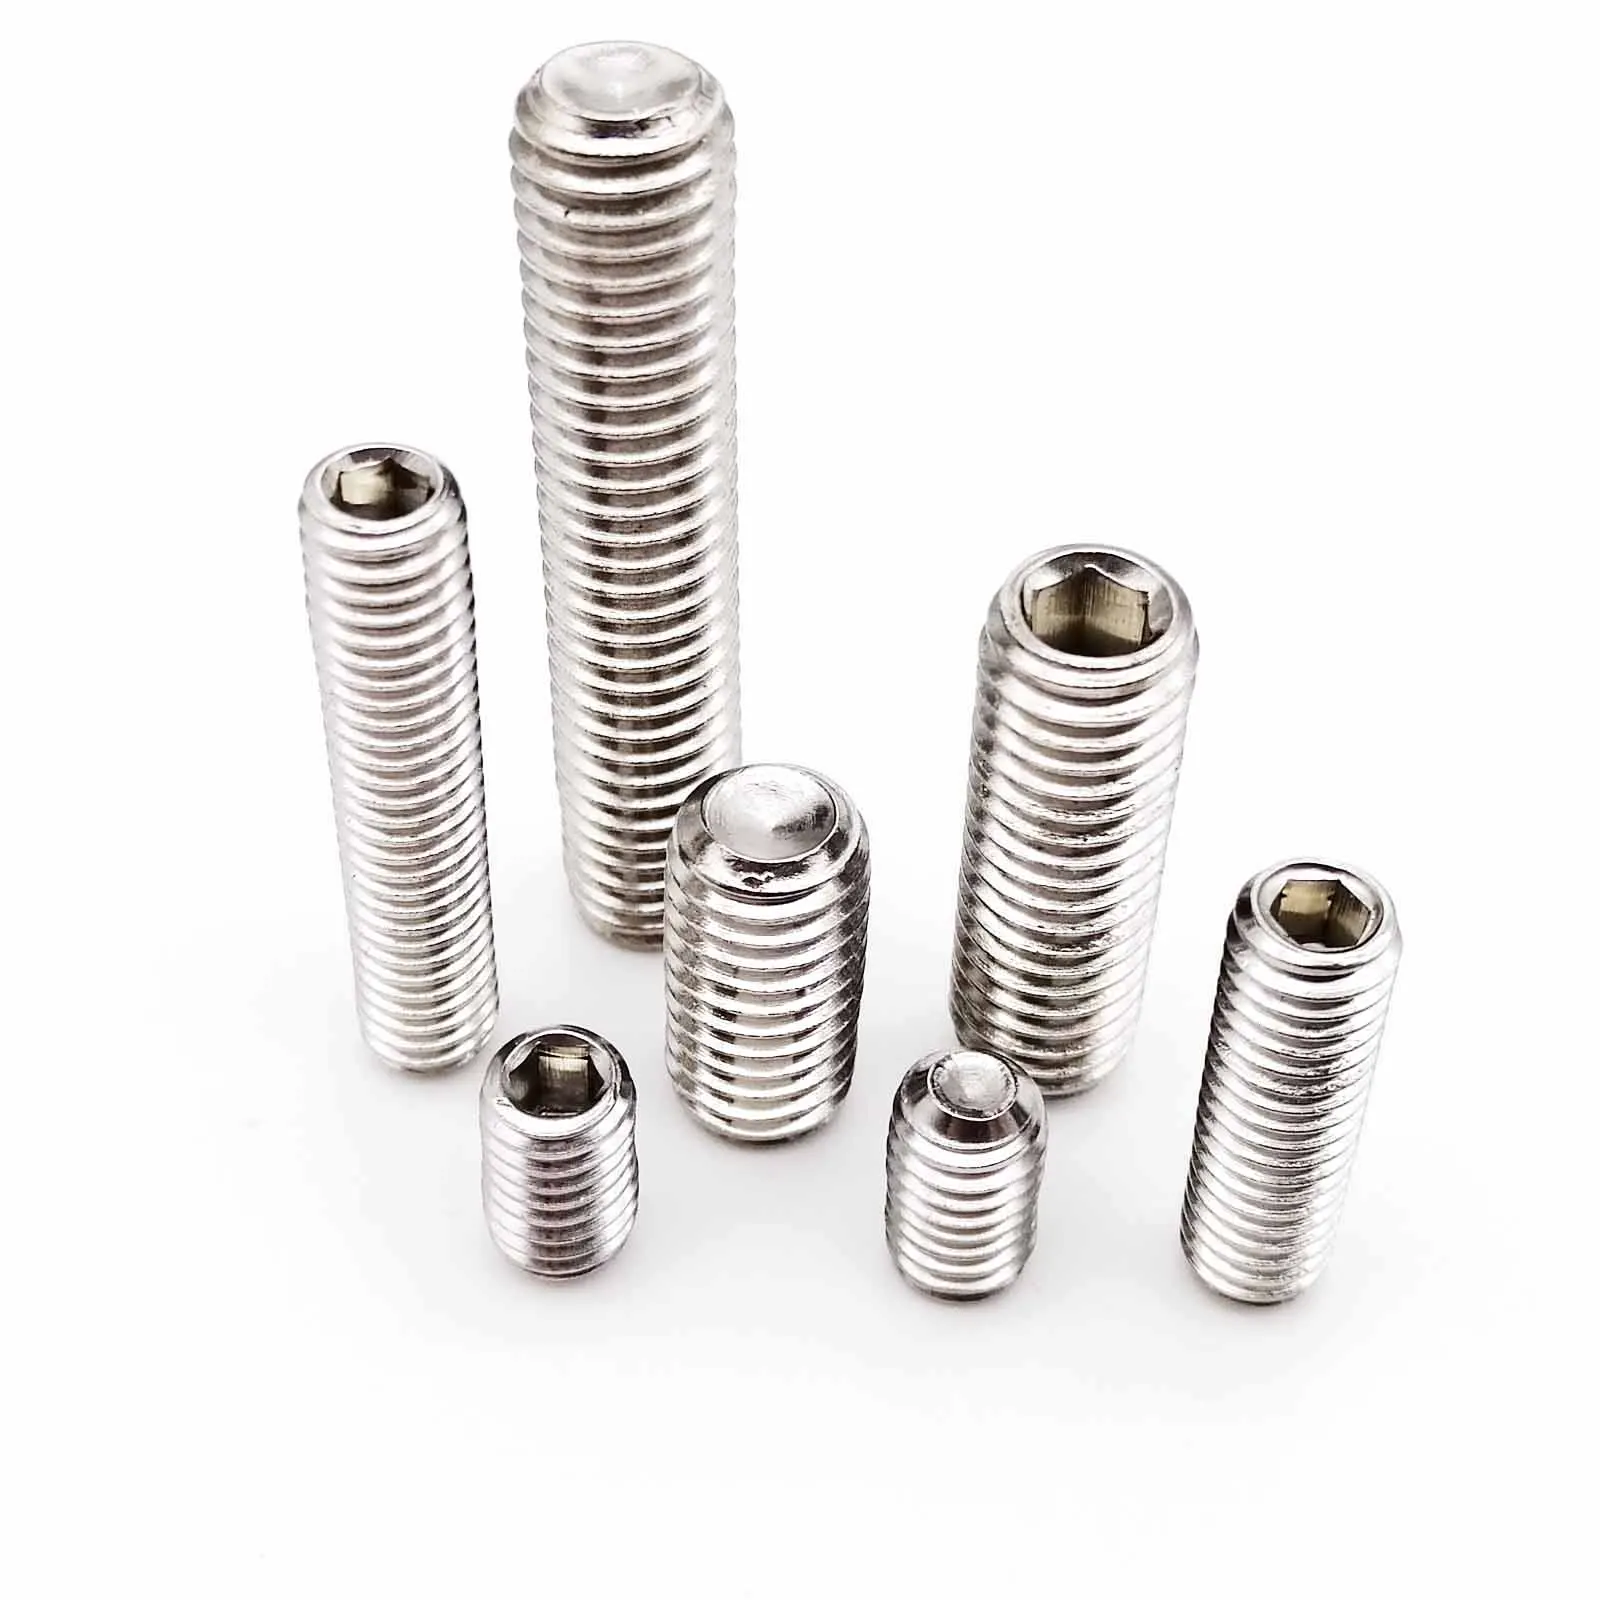 Stainless Steel Grub Screws Pack of 10 M2 M2.5 M3 M4 M5 M6 M8 M10 Cup Point A2 